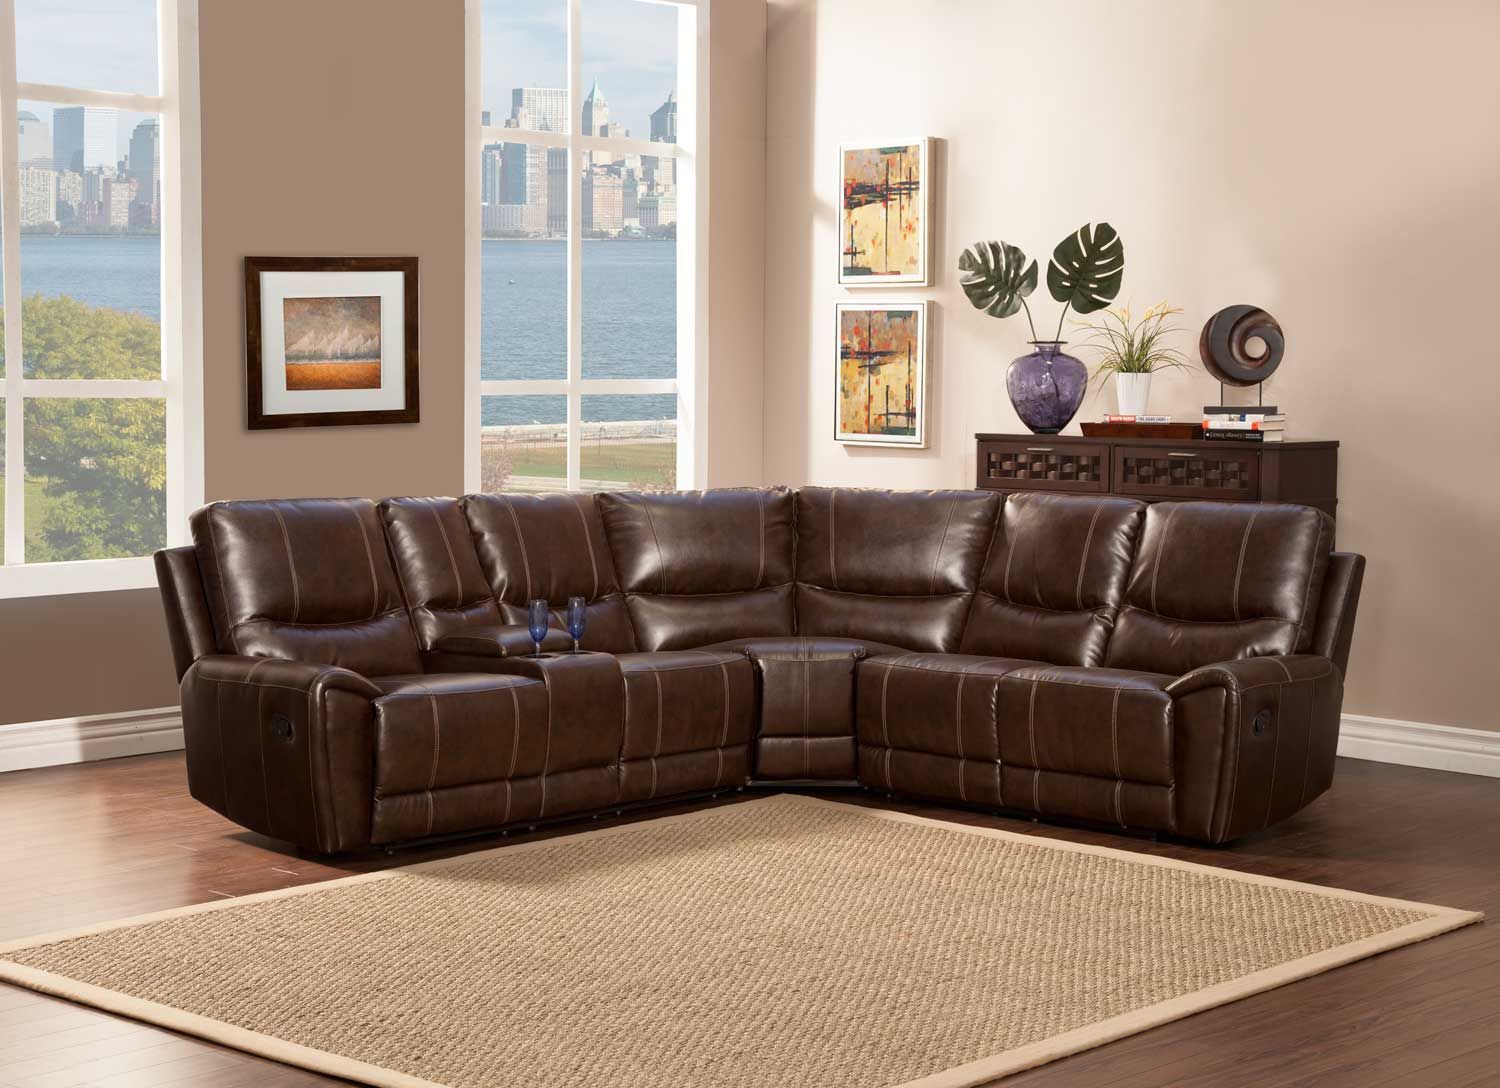 Gerald 4pc Sectional Set | Sectional | Dallas Tx Furniture In 4pc Beckett Contemporary Sectional Sofas And Ottoman Sets (Photo 7 of 15)